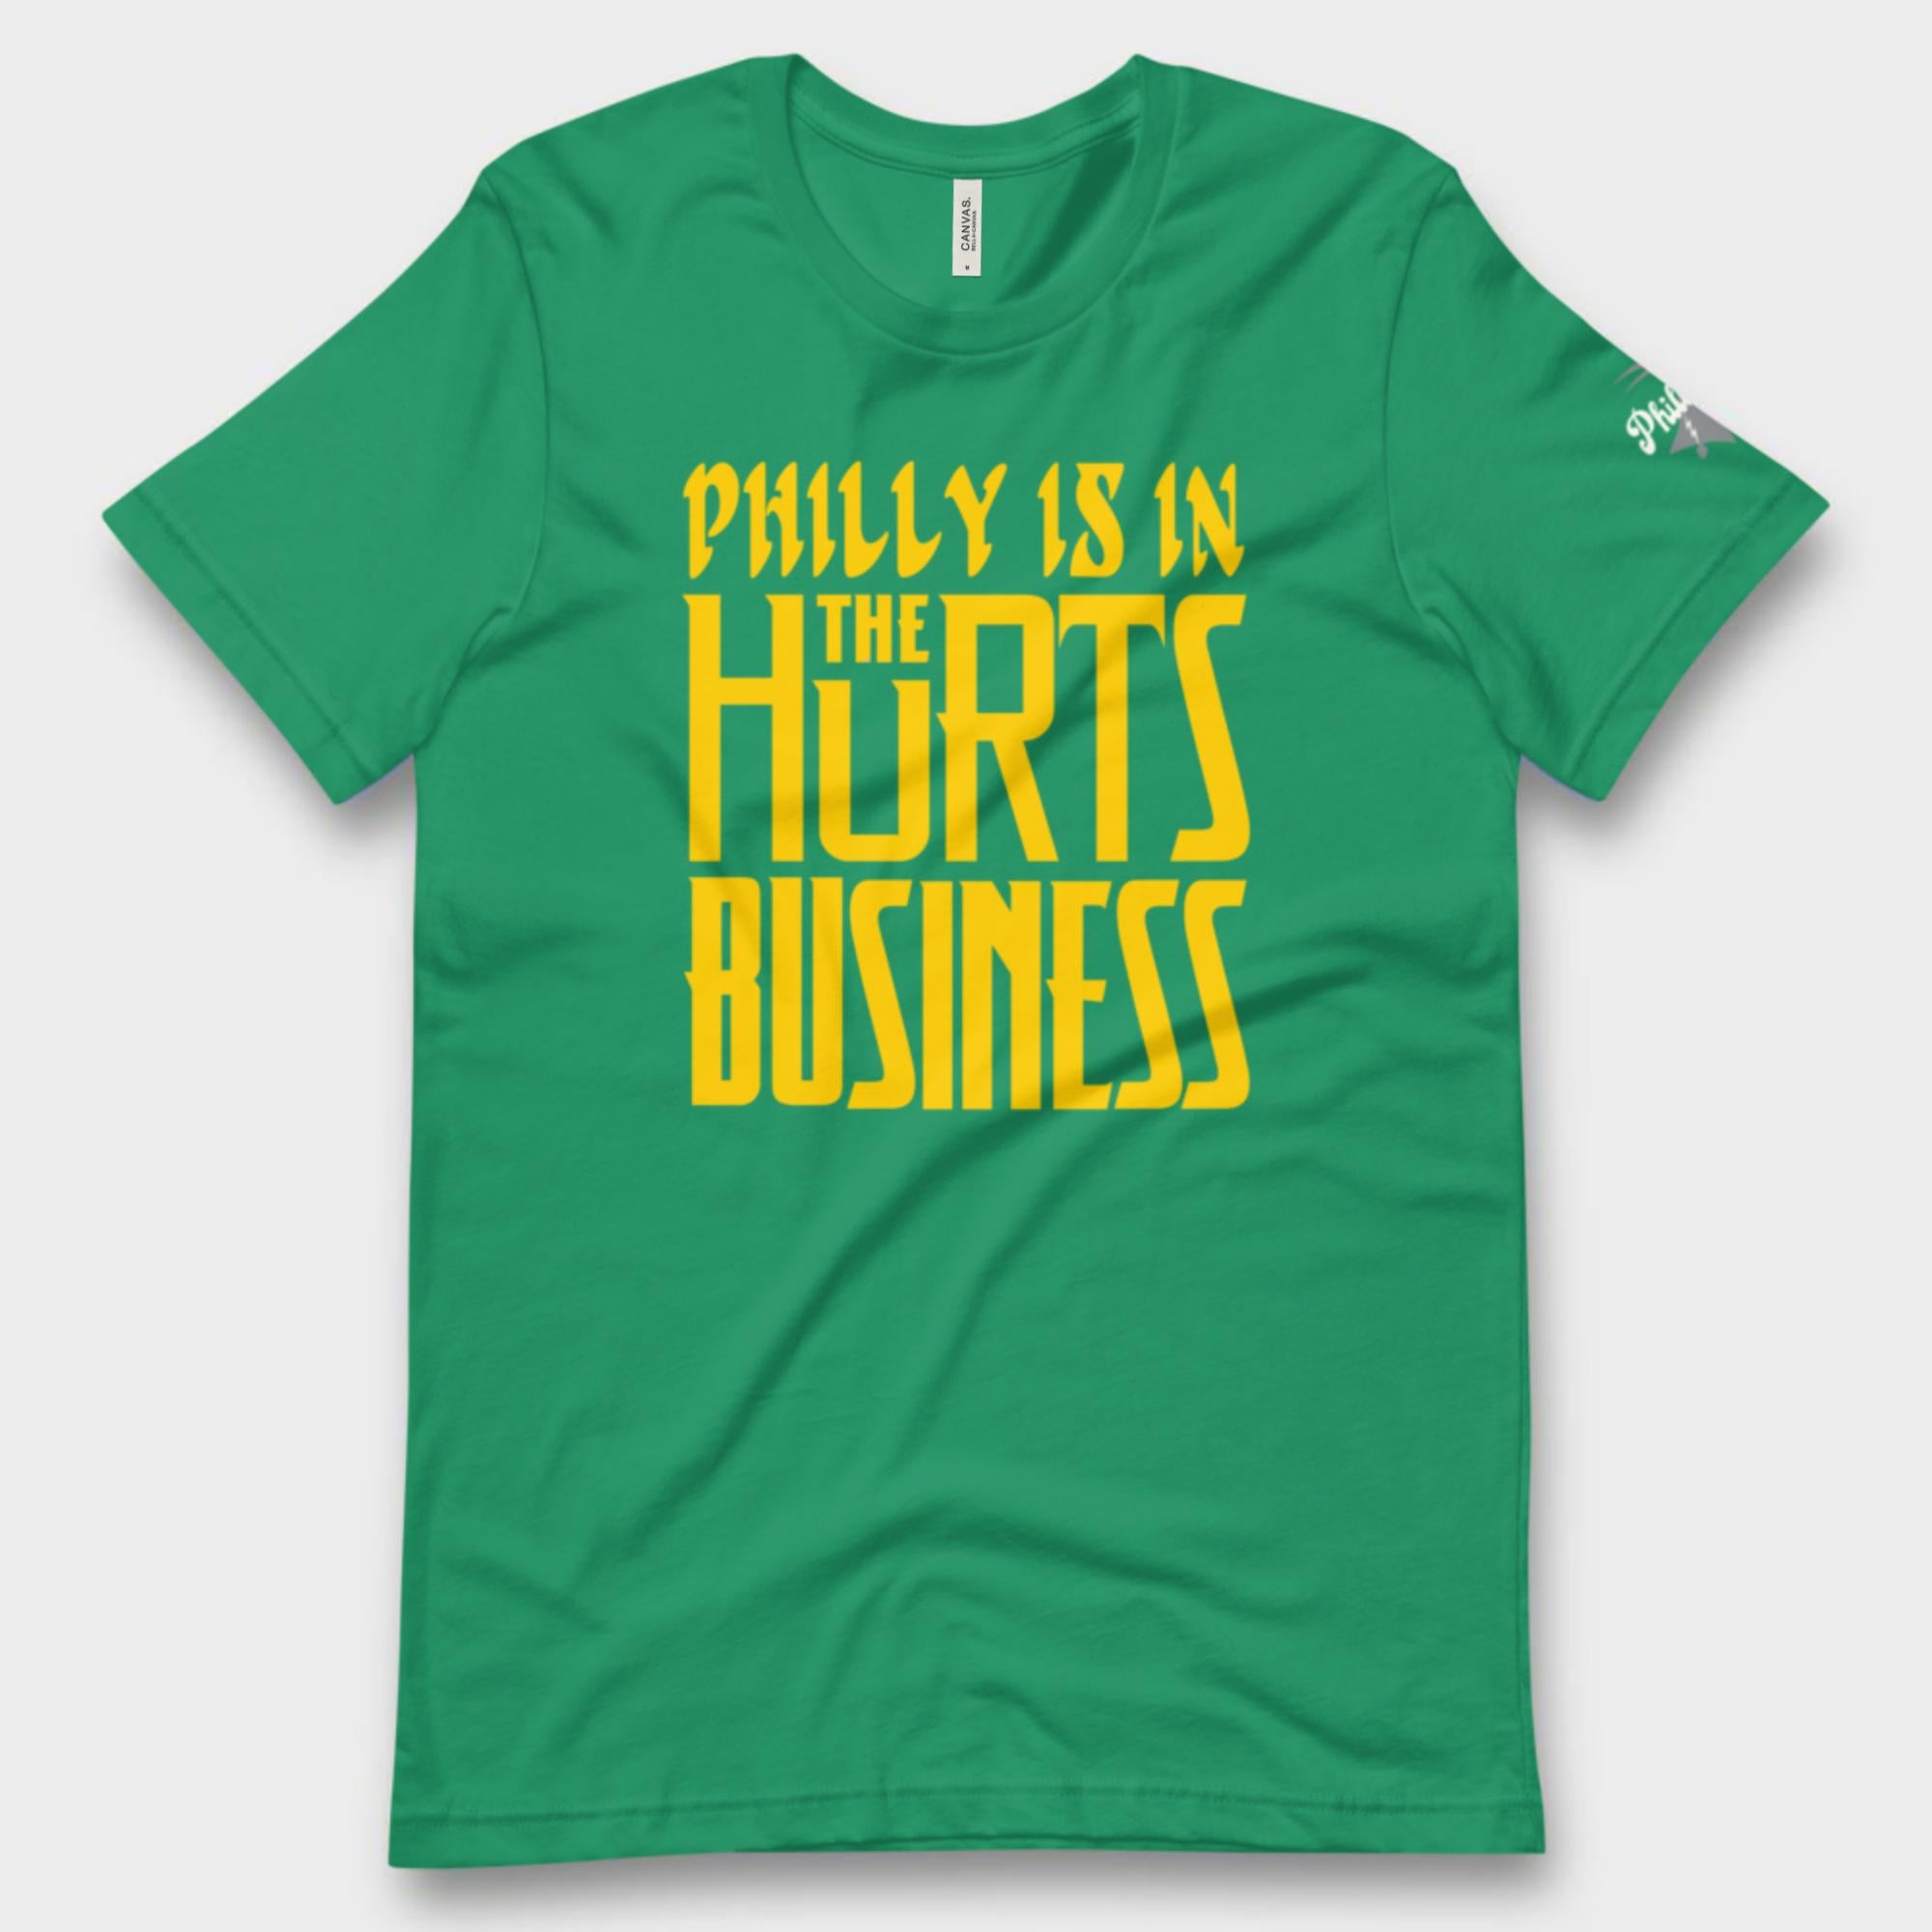 "The Hurts Business" Tee